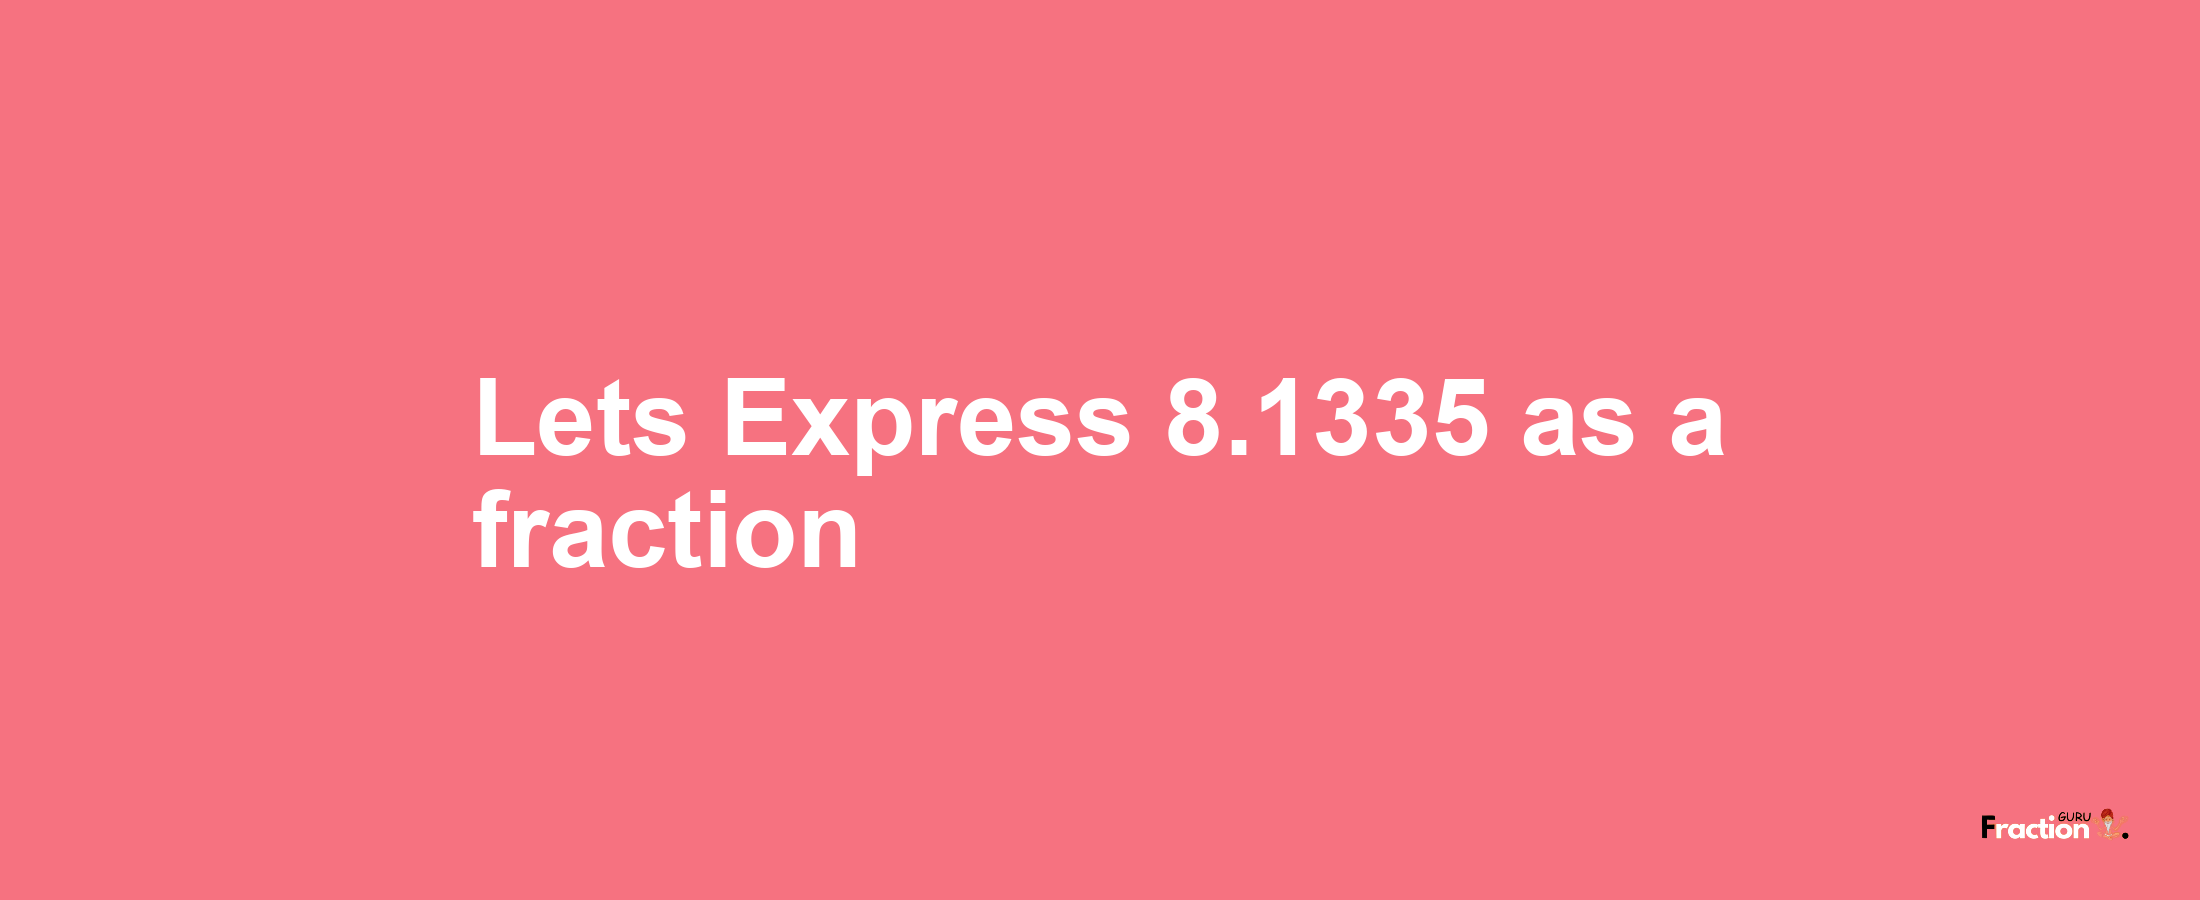 Lets Express 8.1335 as afraction